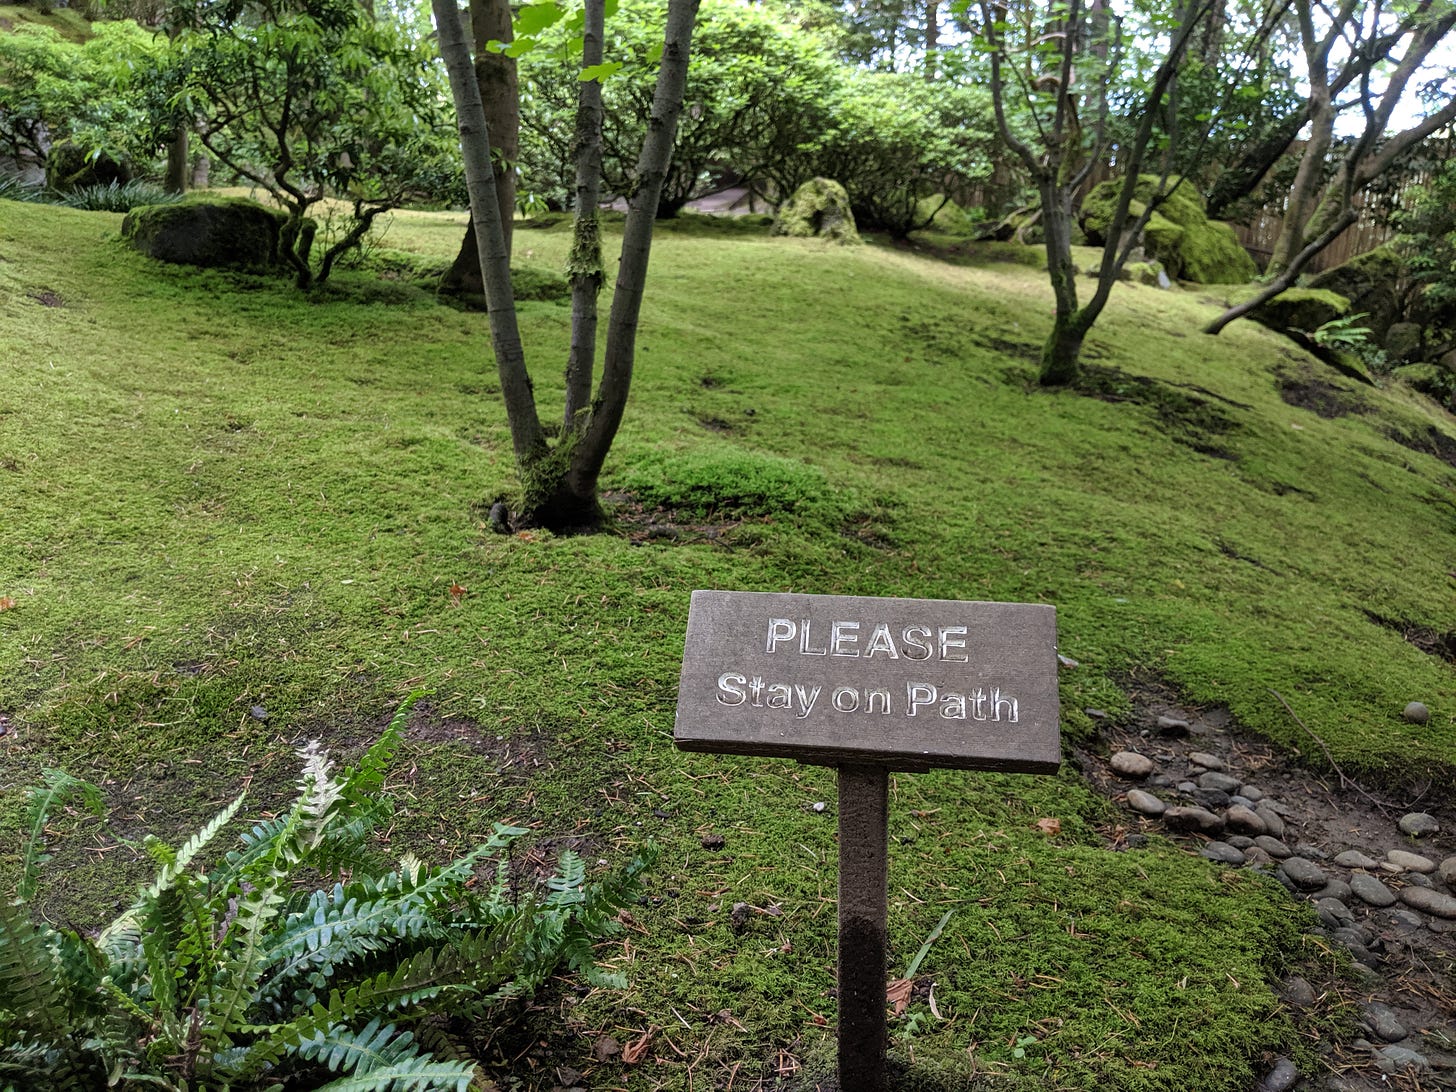 A photo of a sign on a trail that says "Please stay on path", with delicate mosses and small trees in the background